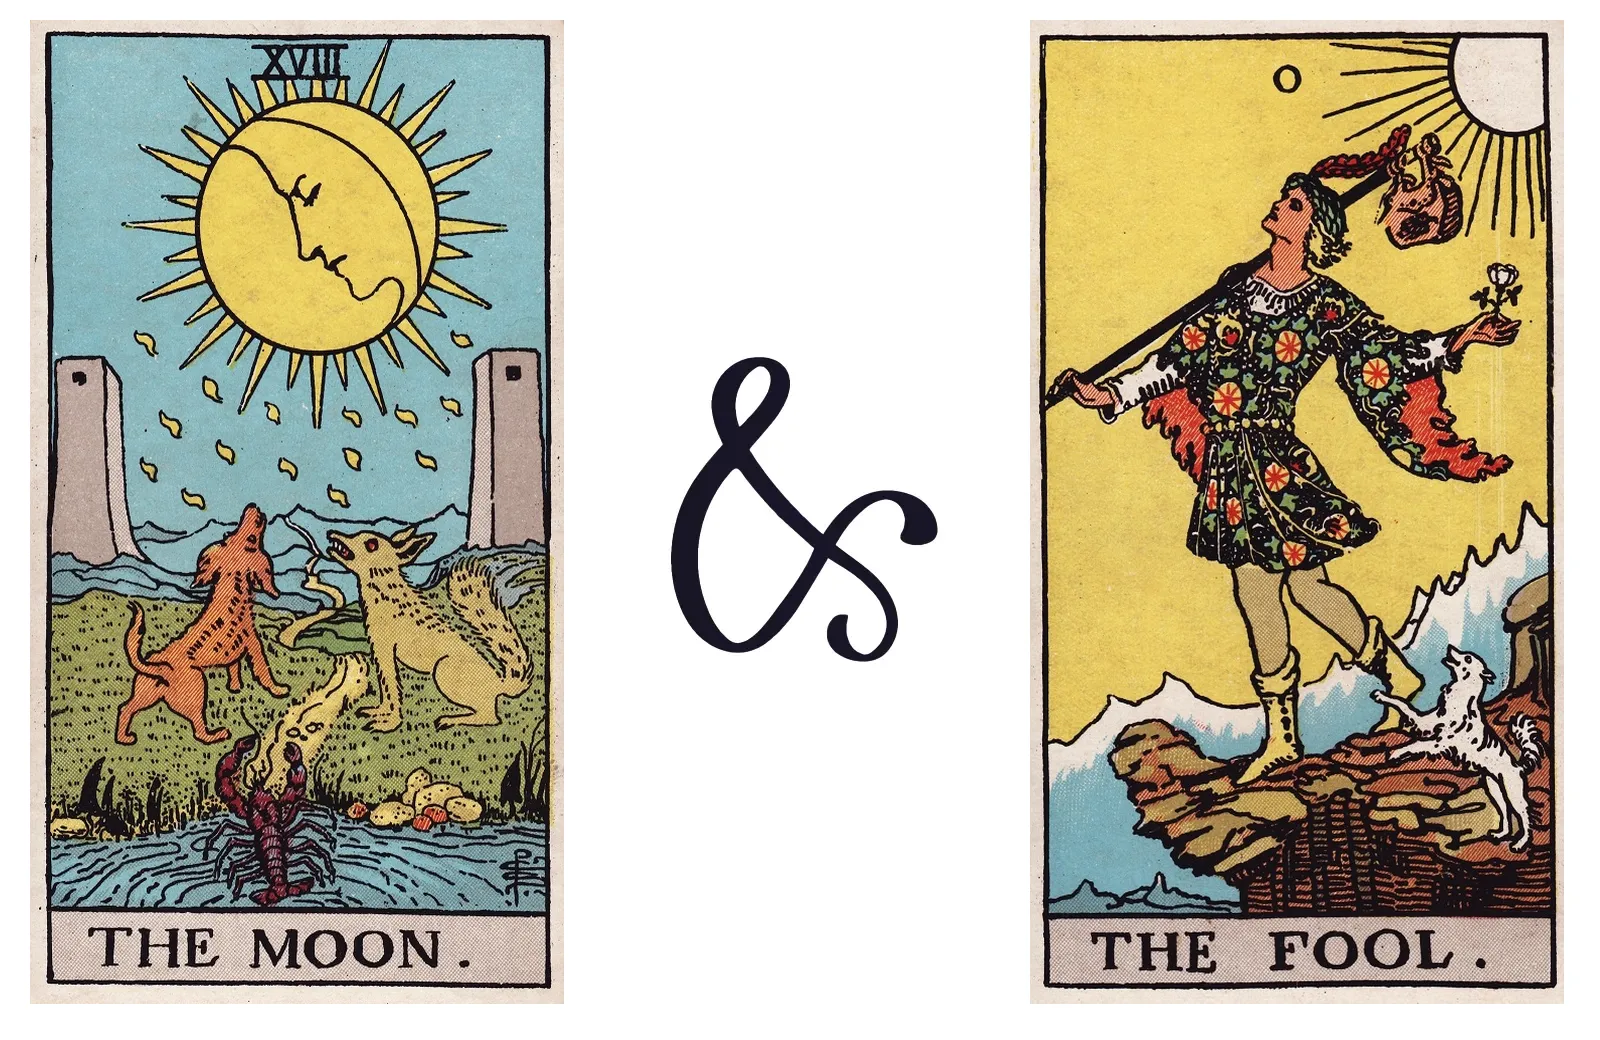 The Moon and The Fool